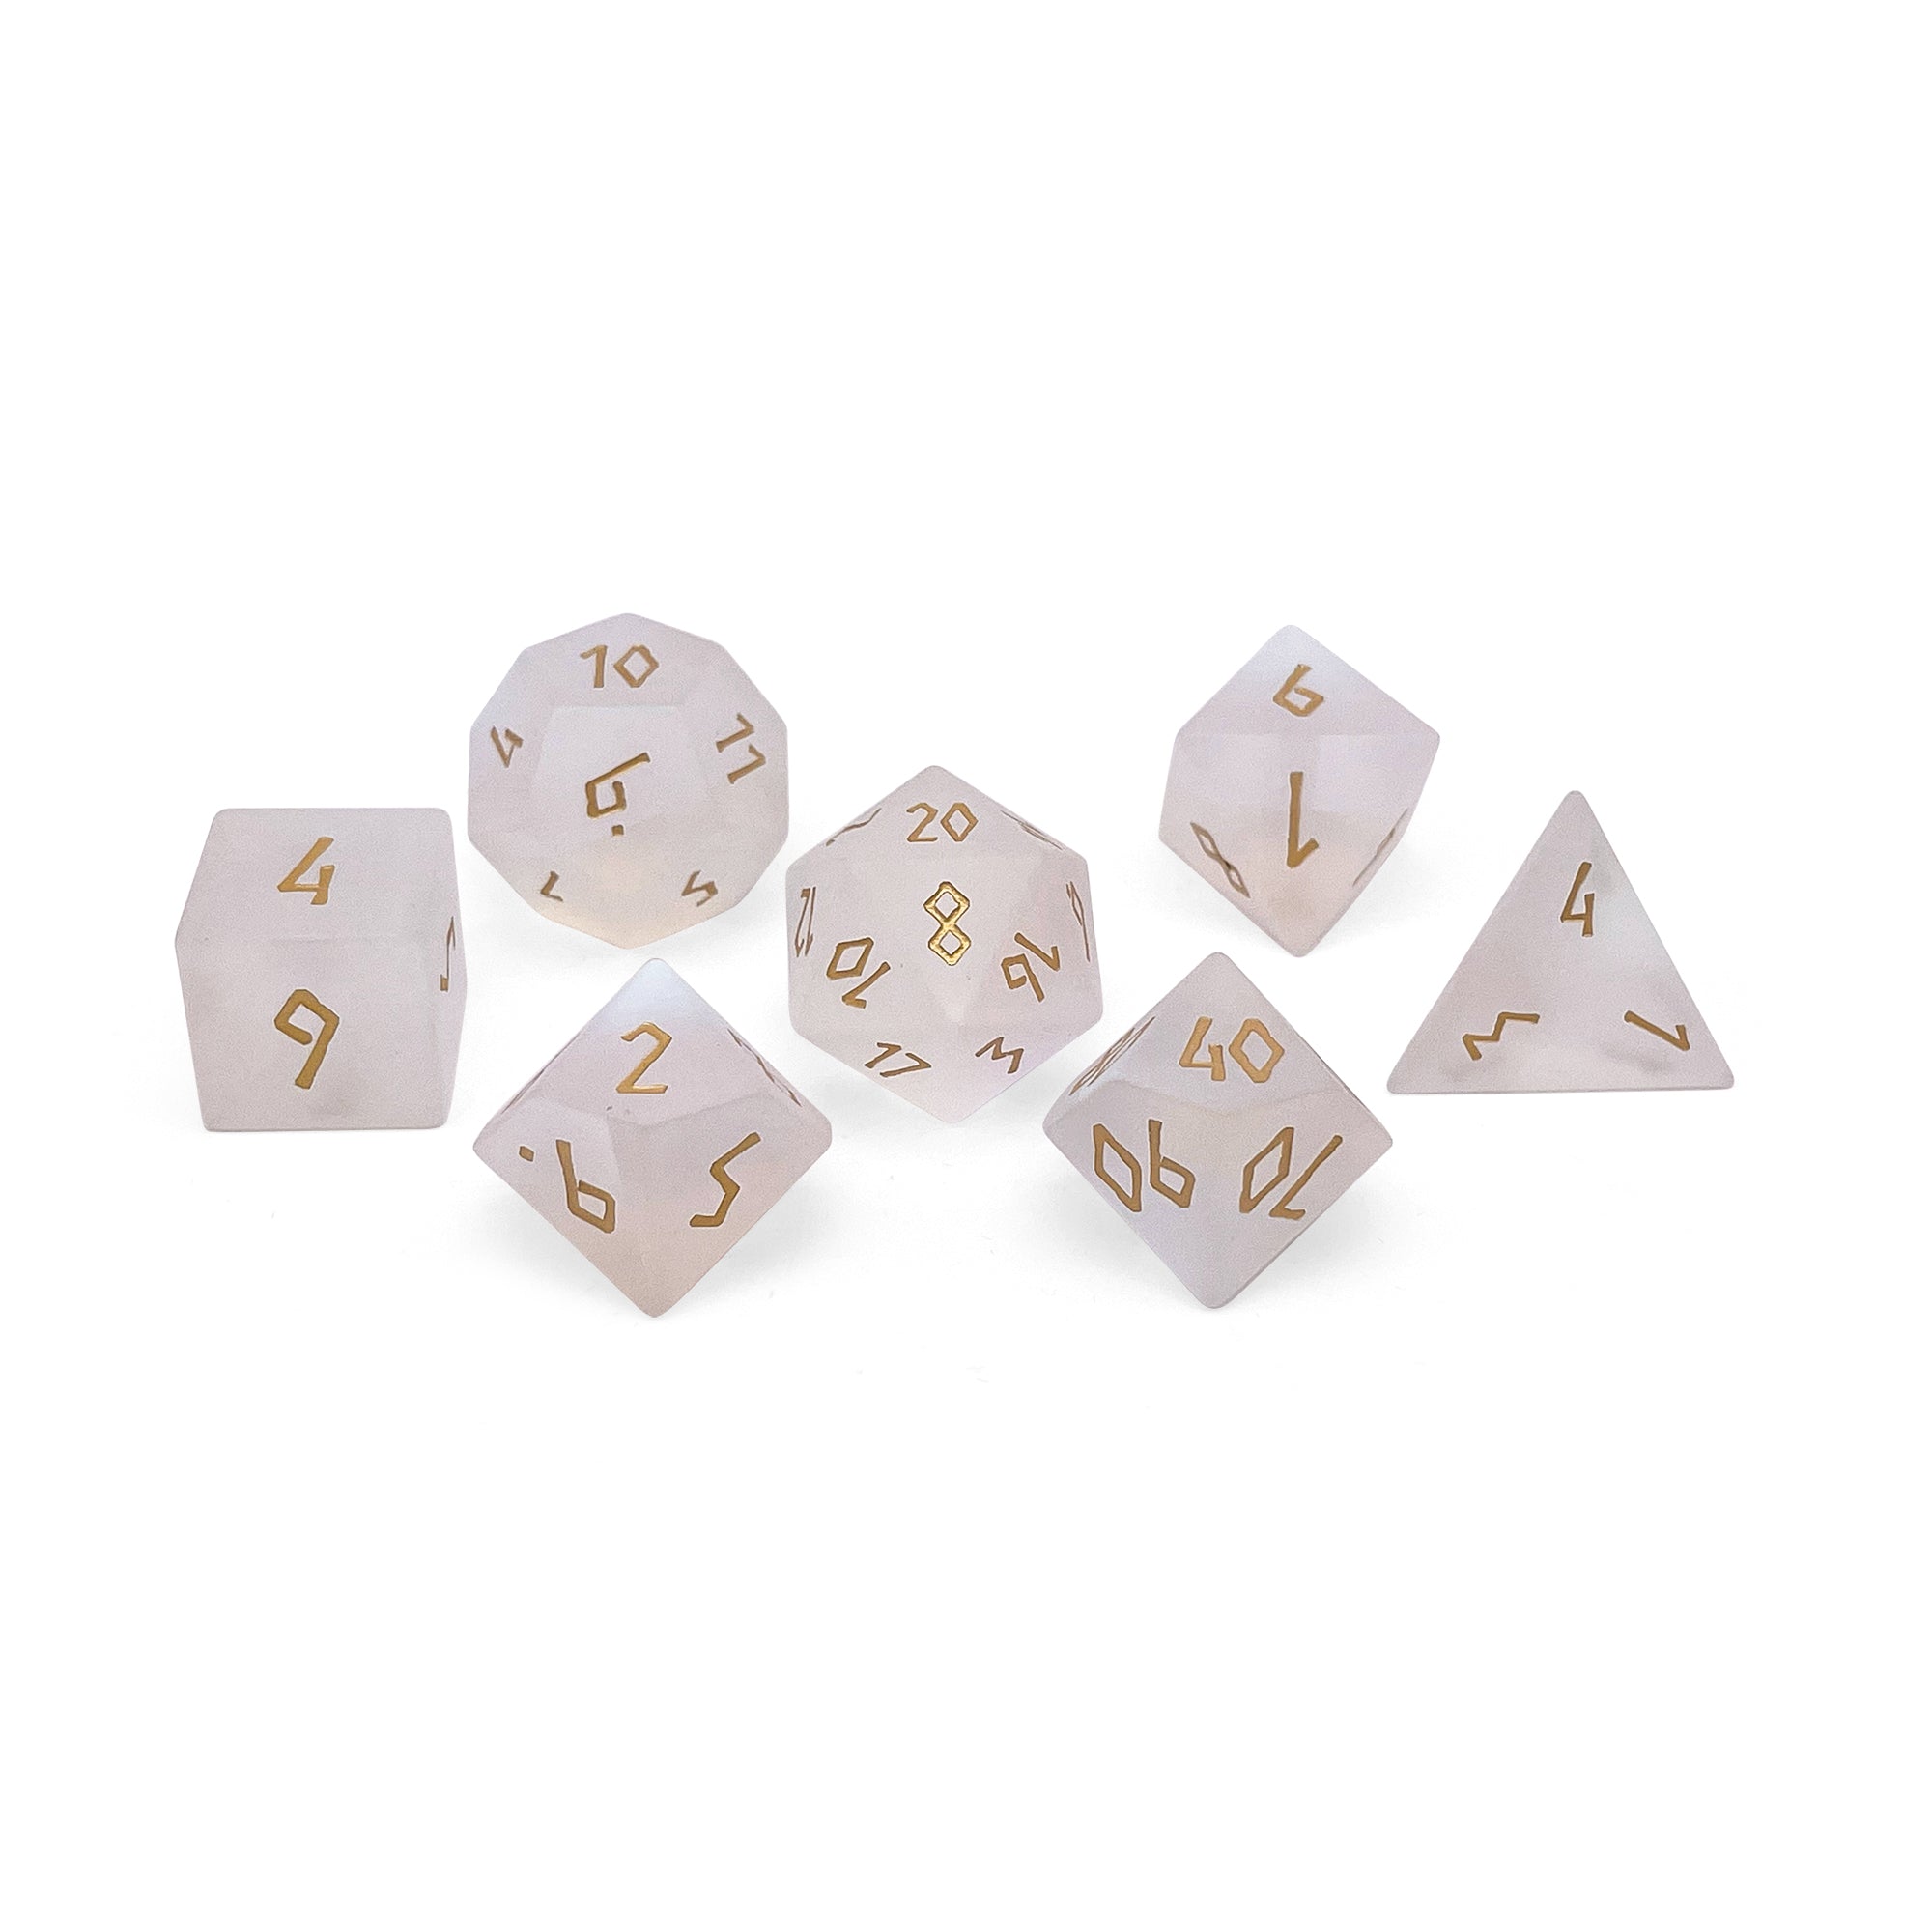 Frosted K9 Rainbow Glass - Gold Font 7 Piece RPG Set K9 Glass Dice